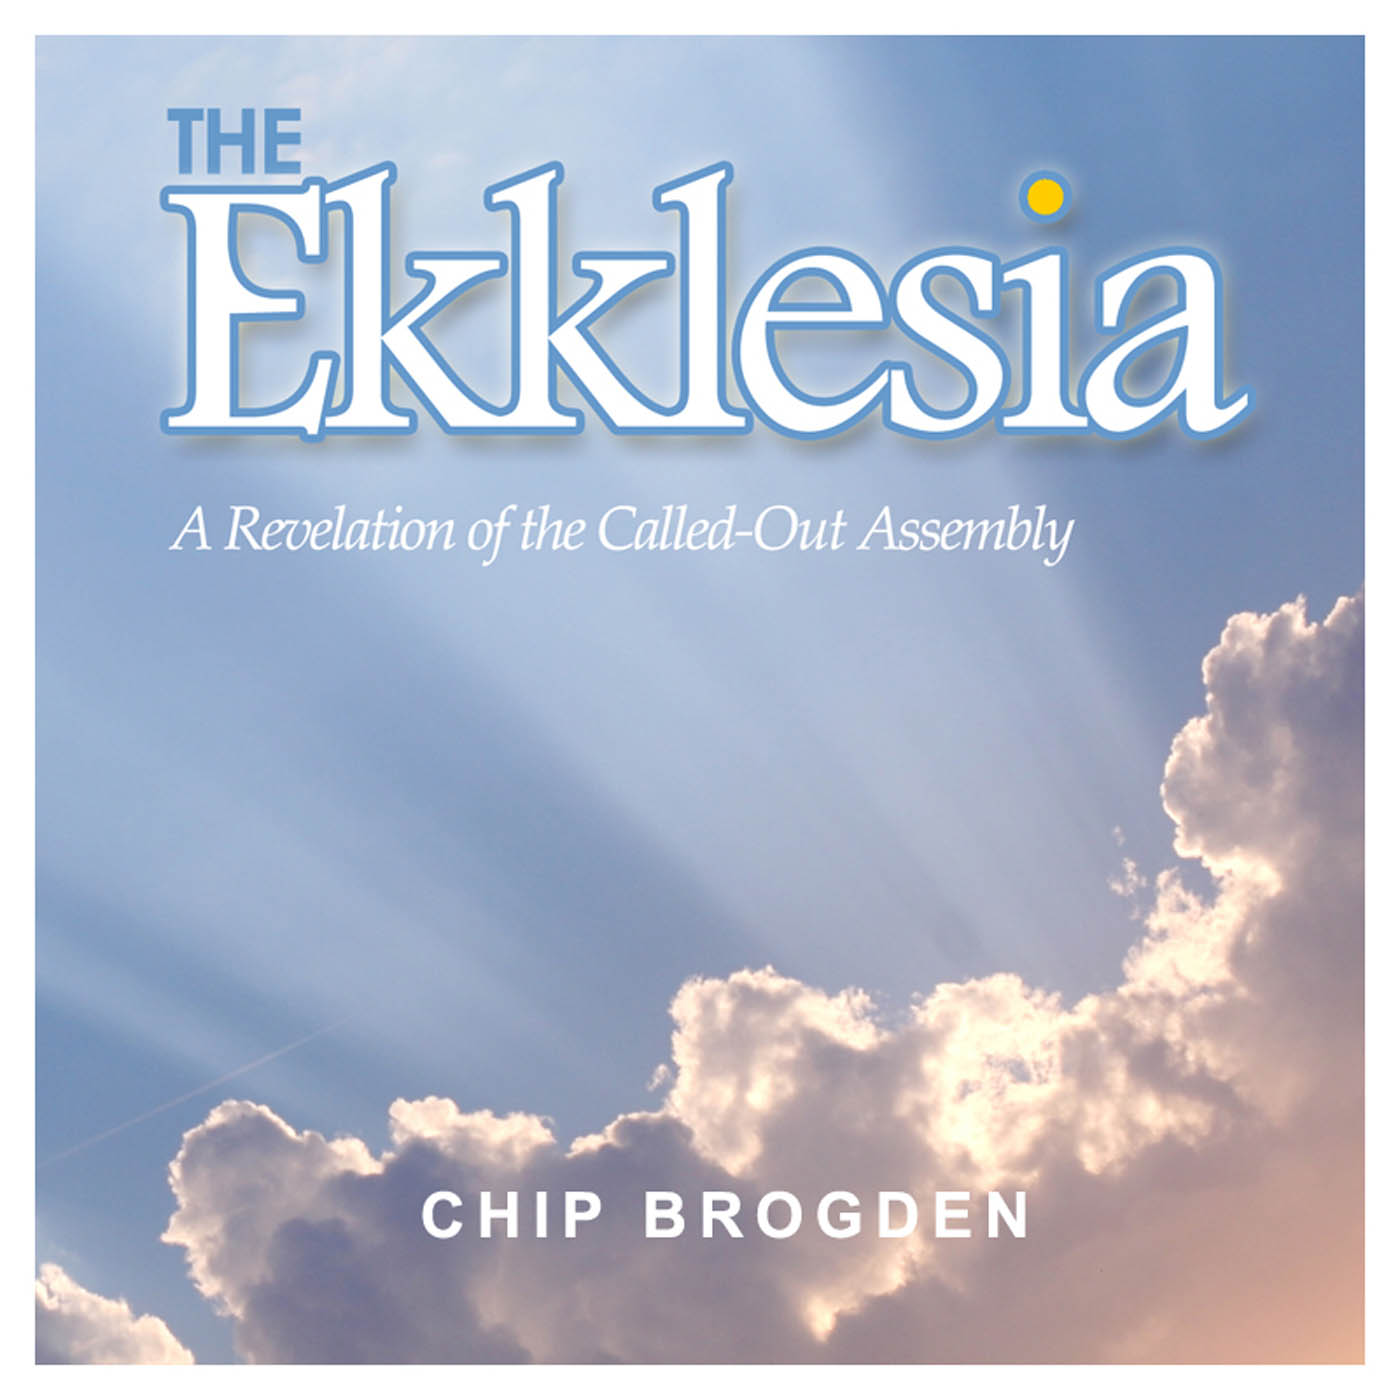 The Ekklesia: A Revelation of the Called-Out Assembly